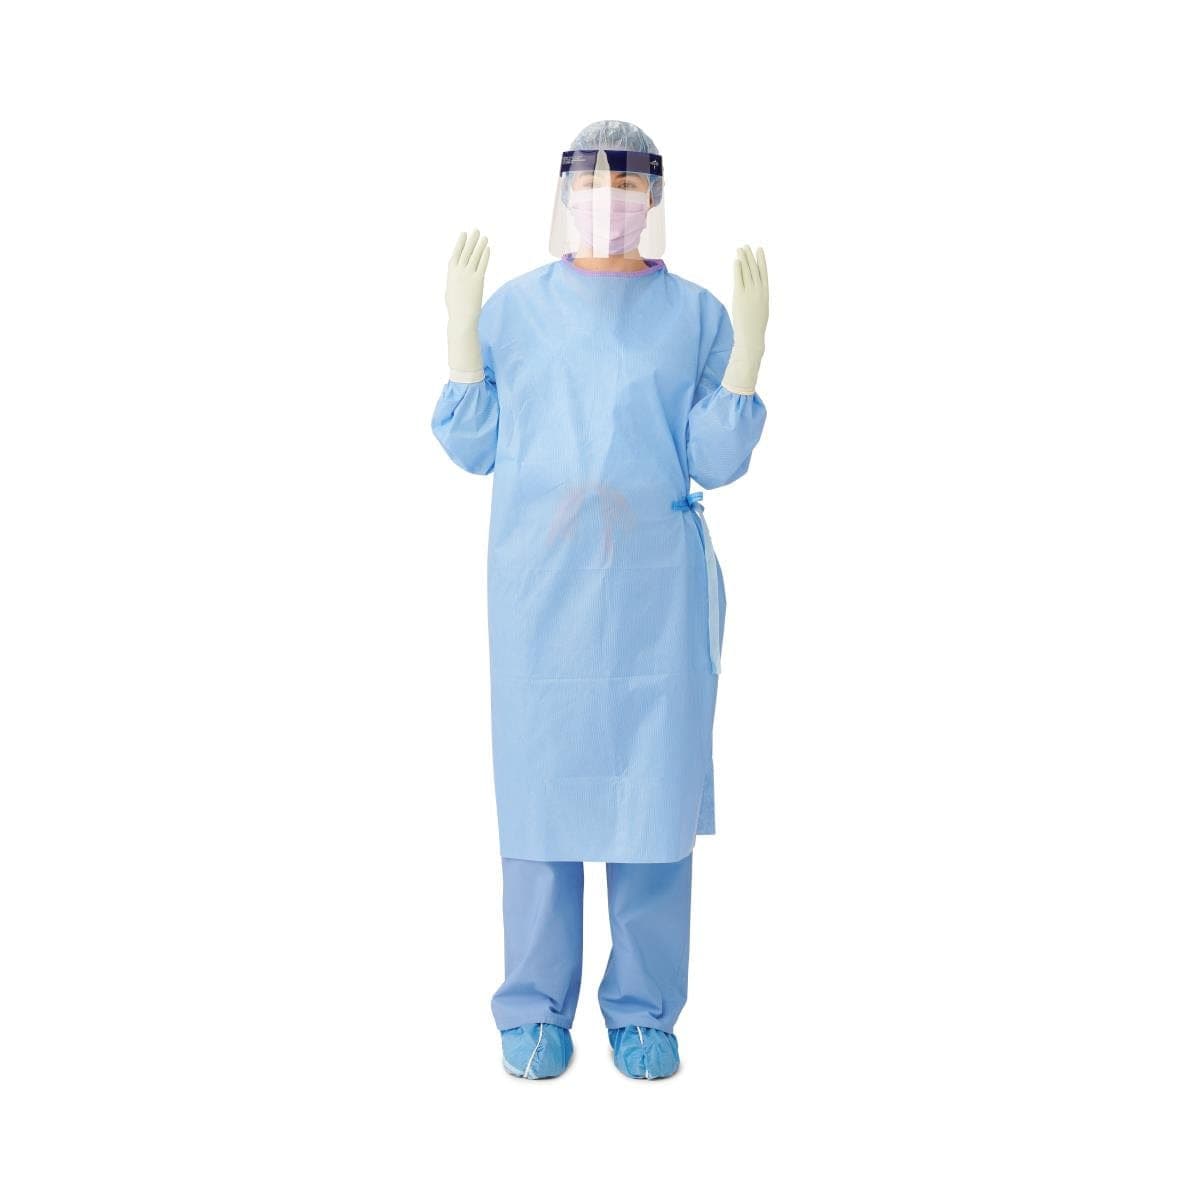 Medline Medline Sterile Nonreinforced Sirus Surgical Gowns with Set-In Sleeves DYNJP2009S